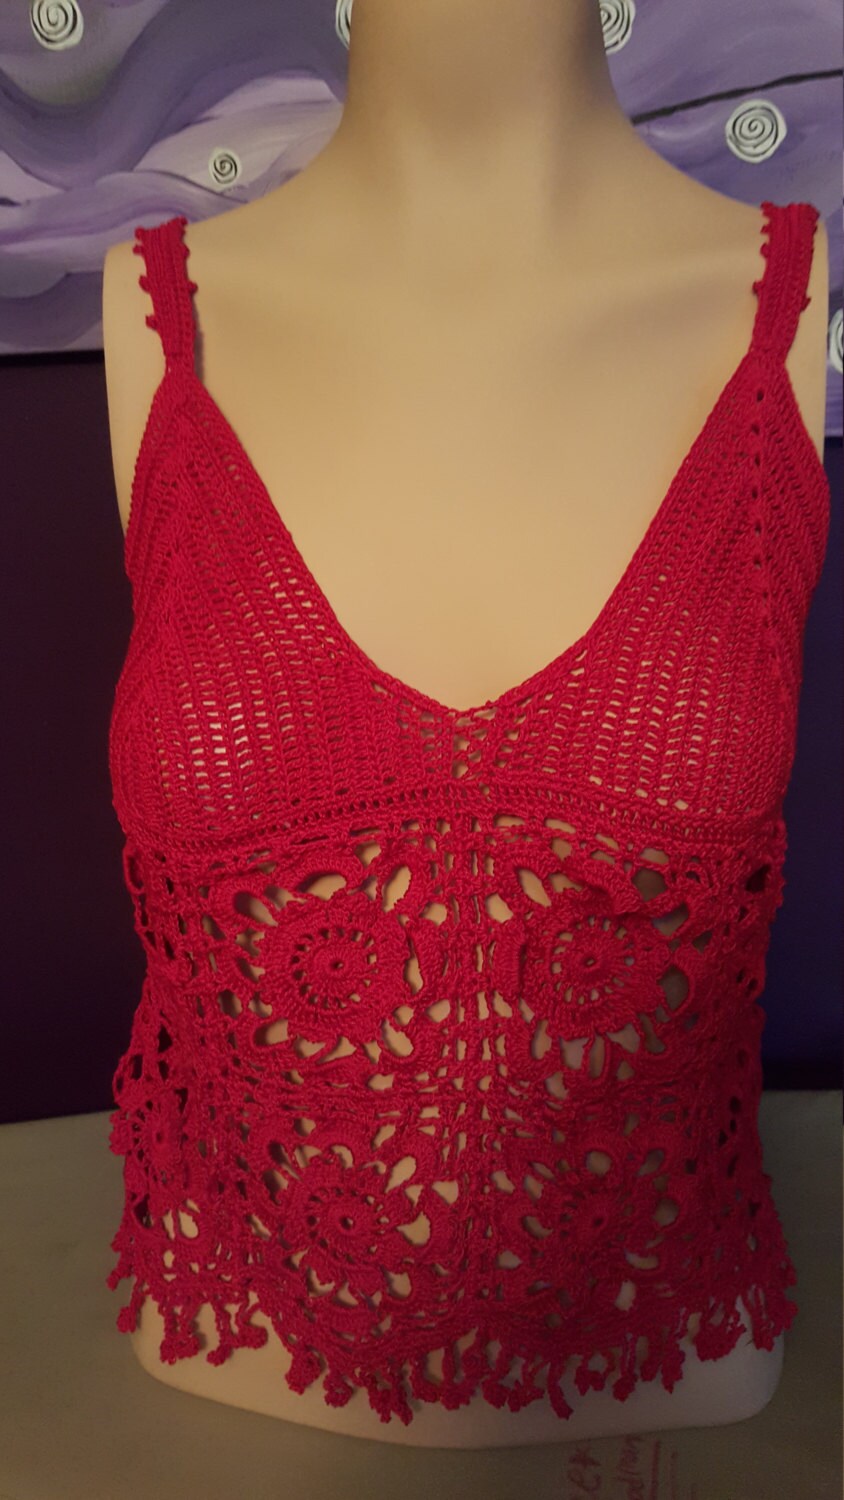 Women's hand crocheted red tank top by LoveAffairOfYarn on Etsy